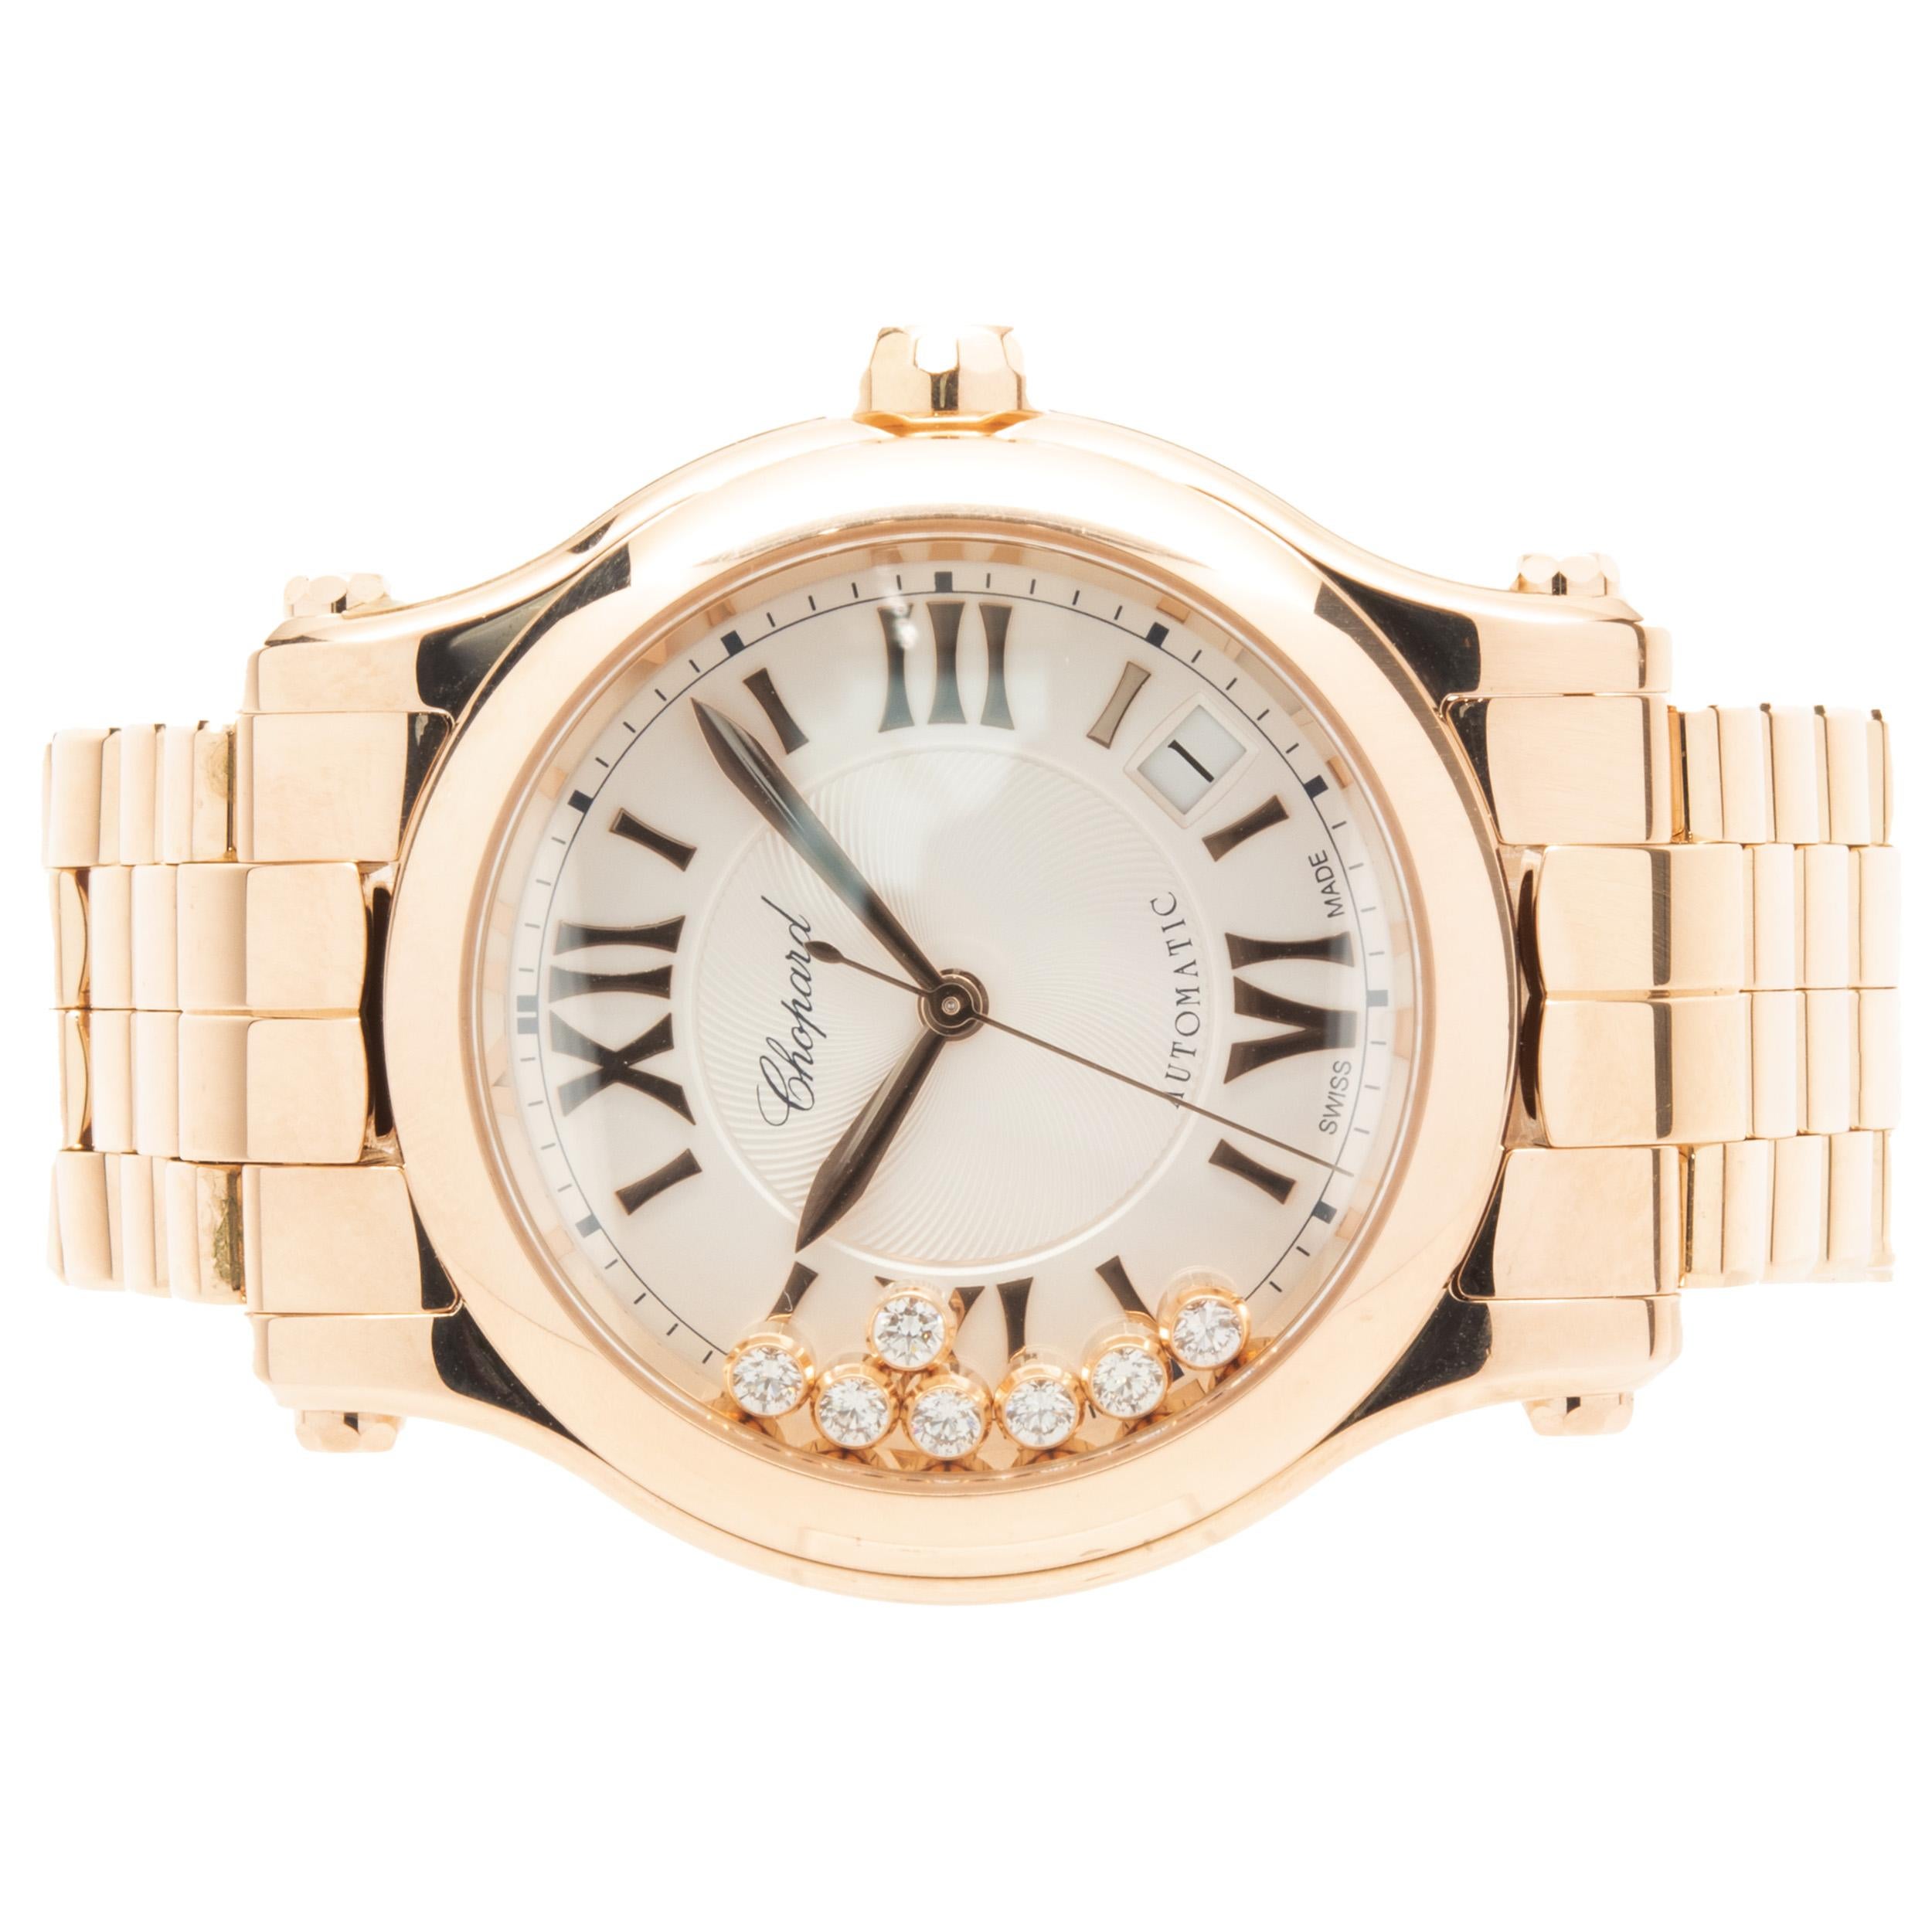 Movement: automatic
Function: hours, minutes, seconds, date
Case: 36mm round, push pull crown, smooth bezel
Band: Chopard 18K rose gold bracelet, integrated clasp
Dial: roman, floating 7 diamond
Reference #: 277472-5002
Serial: 1892XXX

No box or